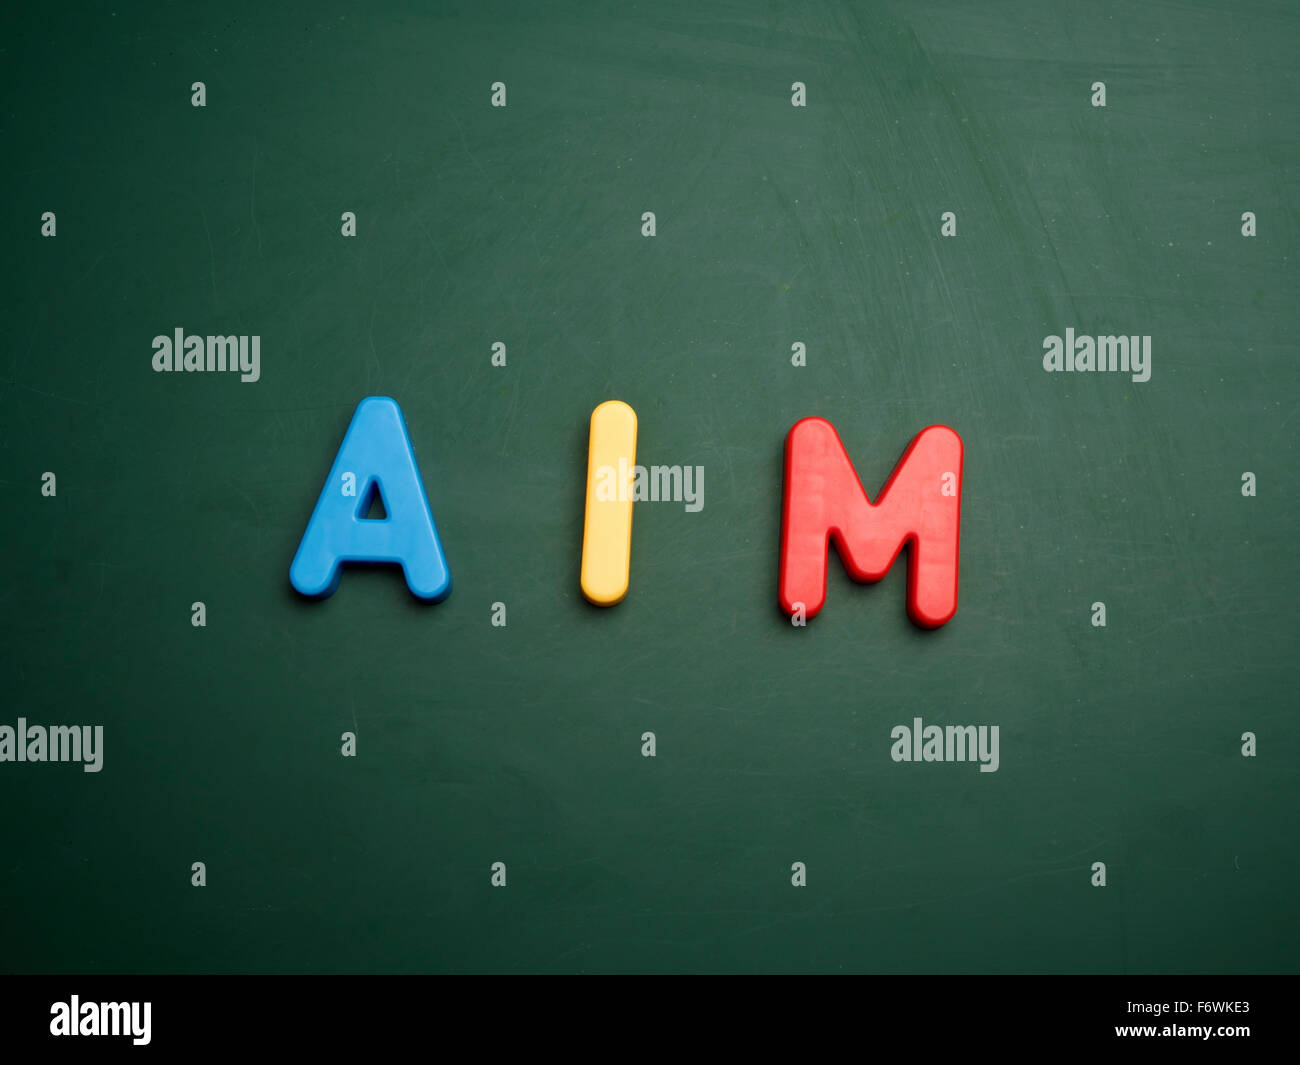 aim concept in colorful letters isolated on blank blackboard Stock Photo